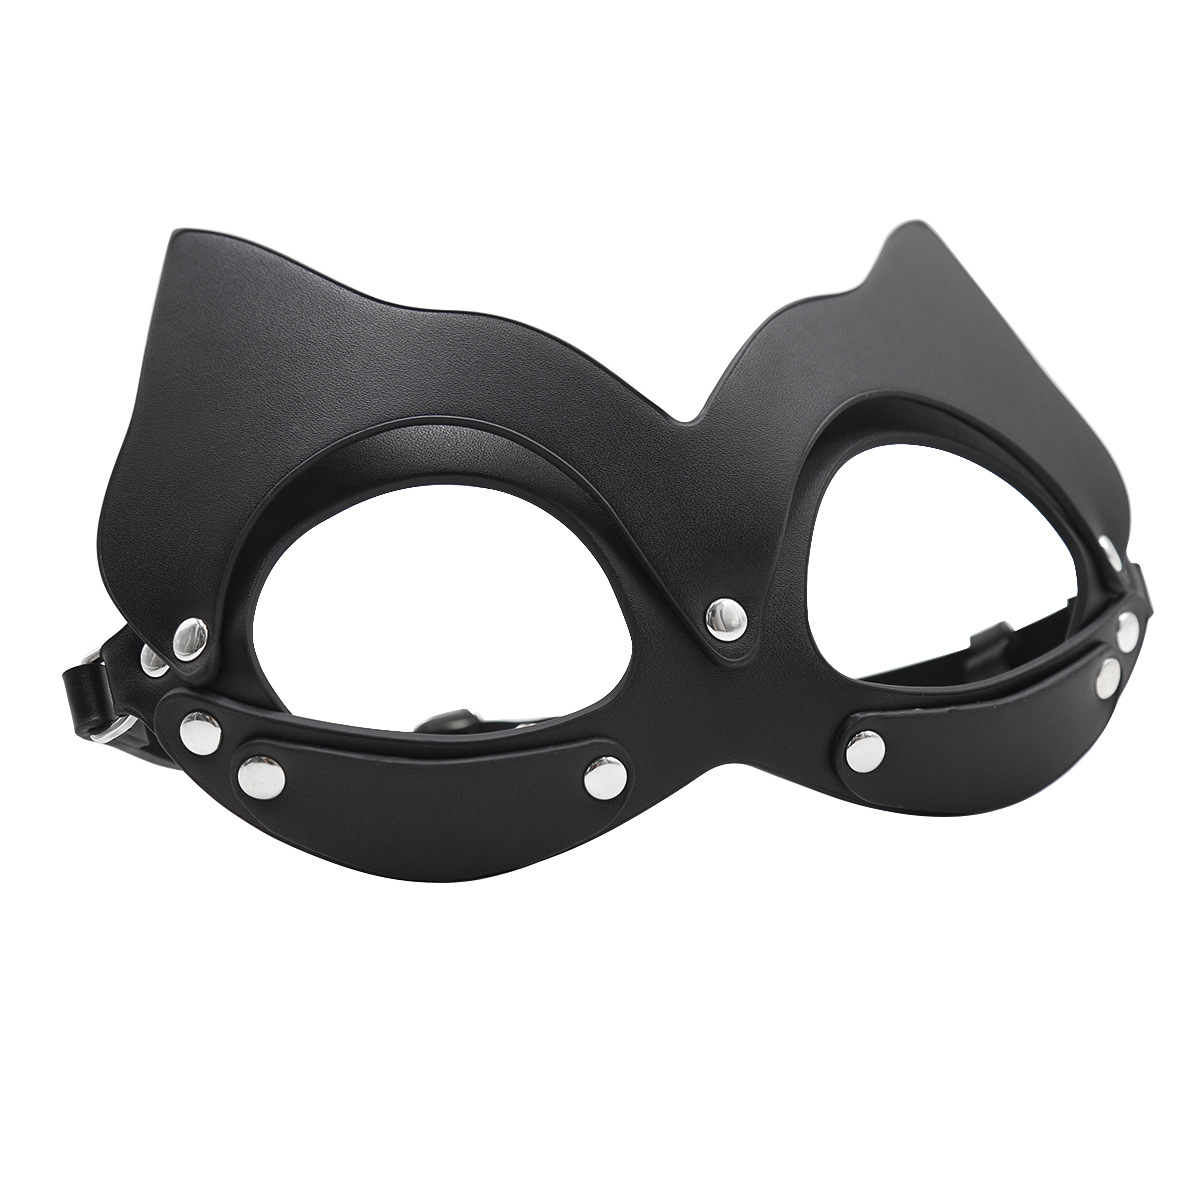 232403096-Sex toy eye mask cat face eye mask alternative toy leather mask face mask stage props coplay costume